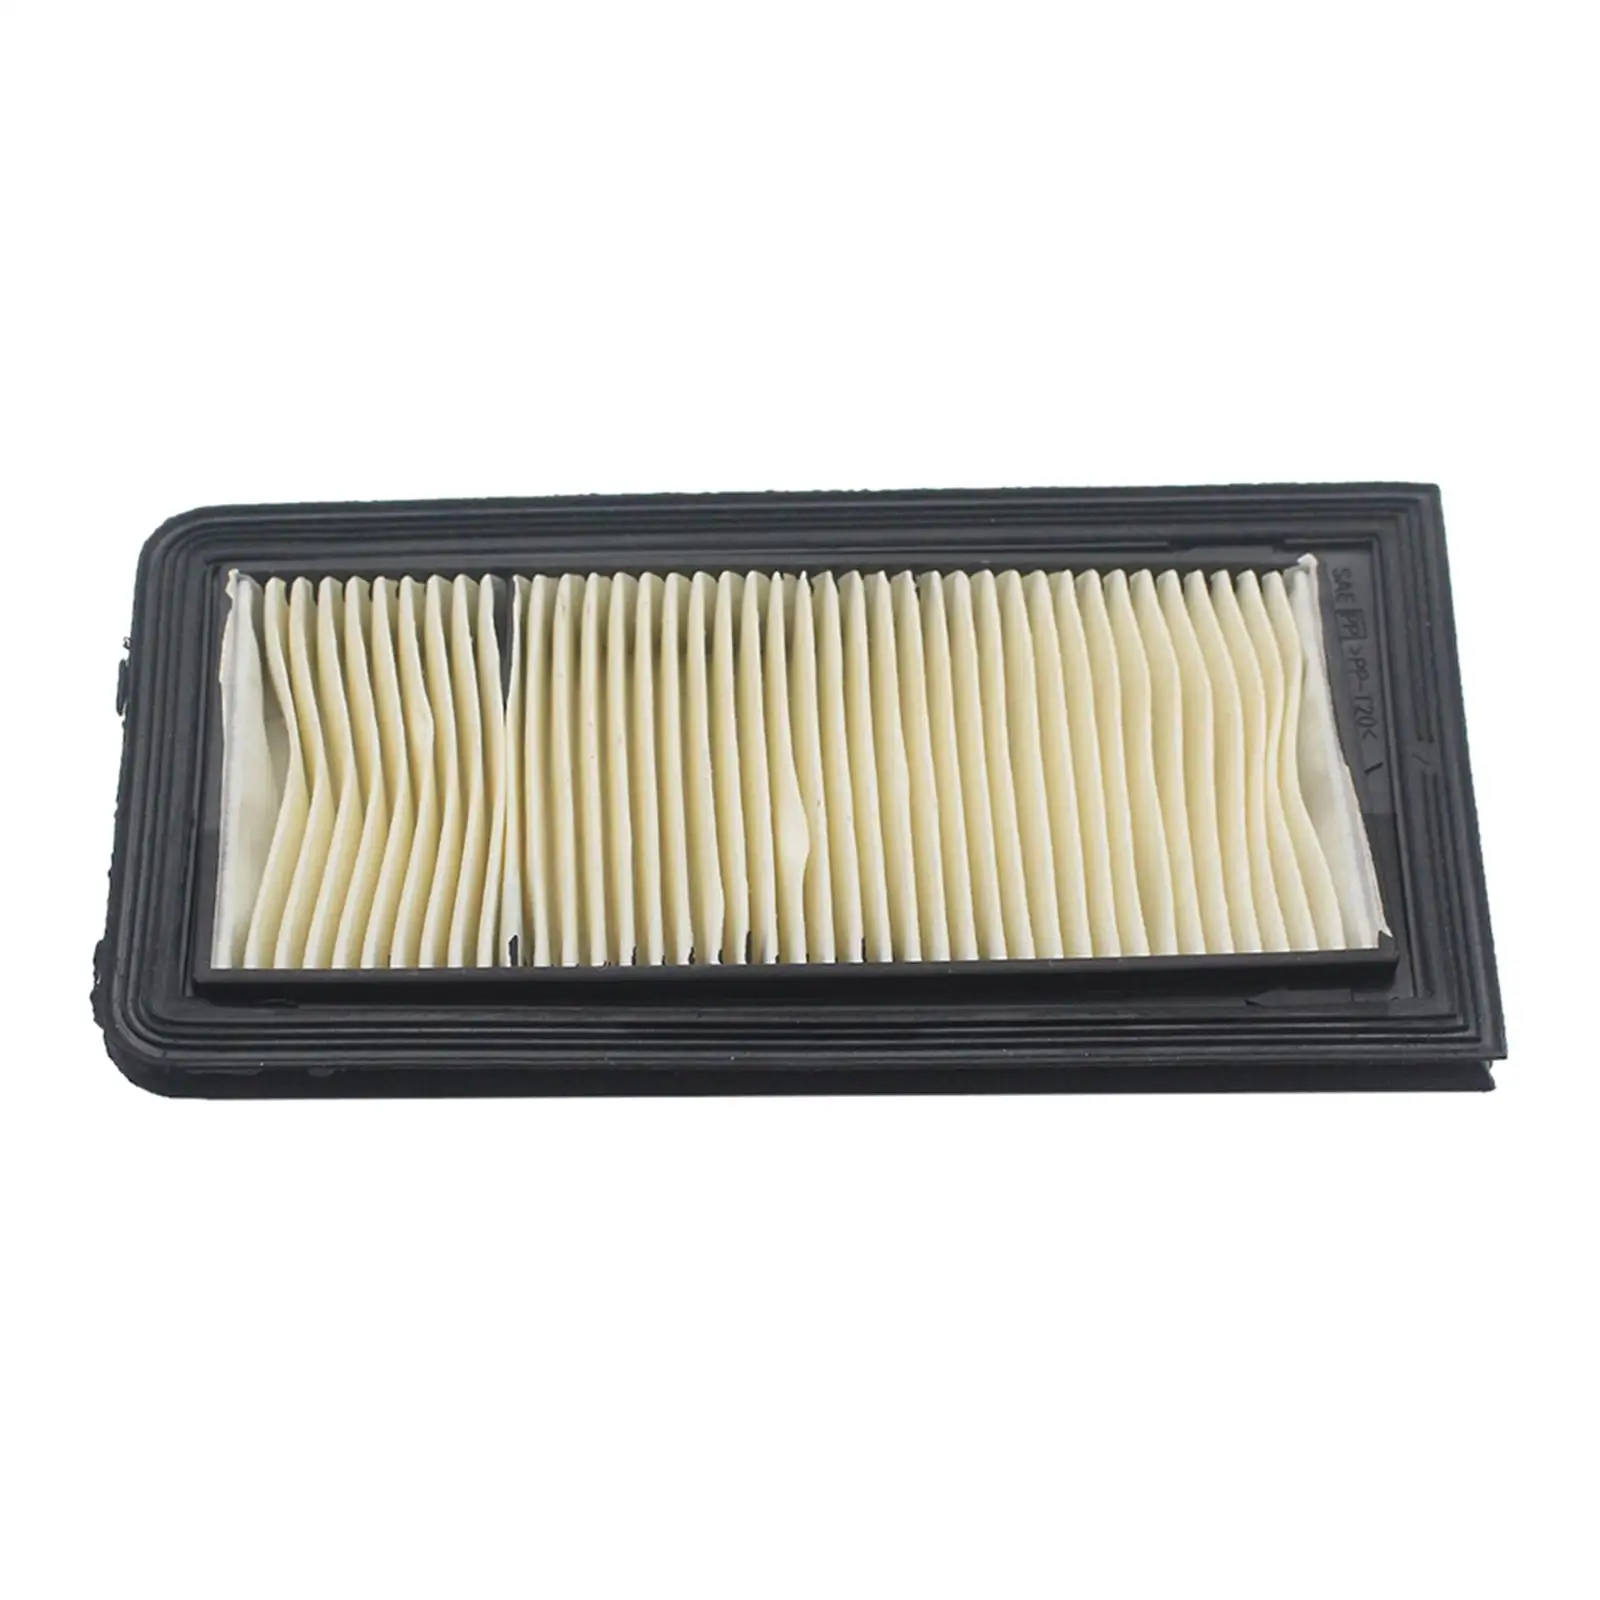 Air Filter Cleaner Element Fits for Suzuki Sky Wave650 650, Easy to